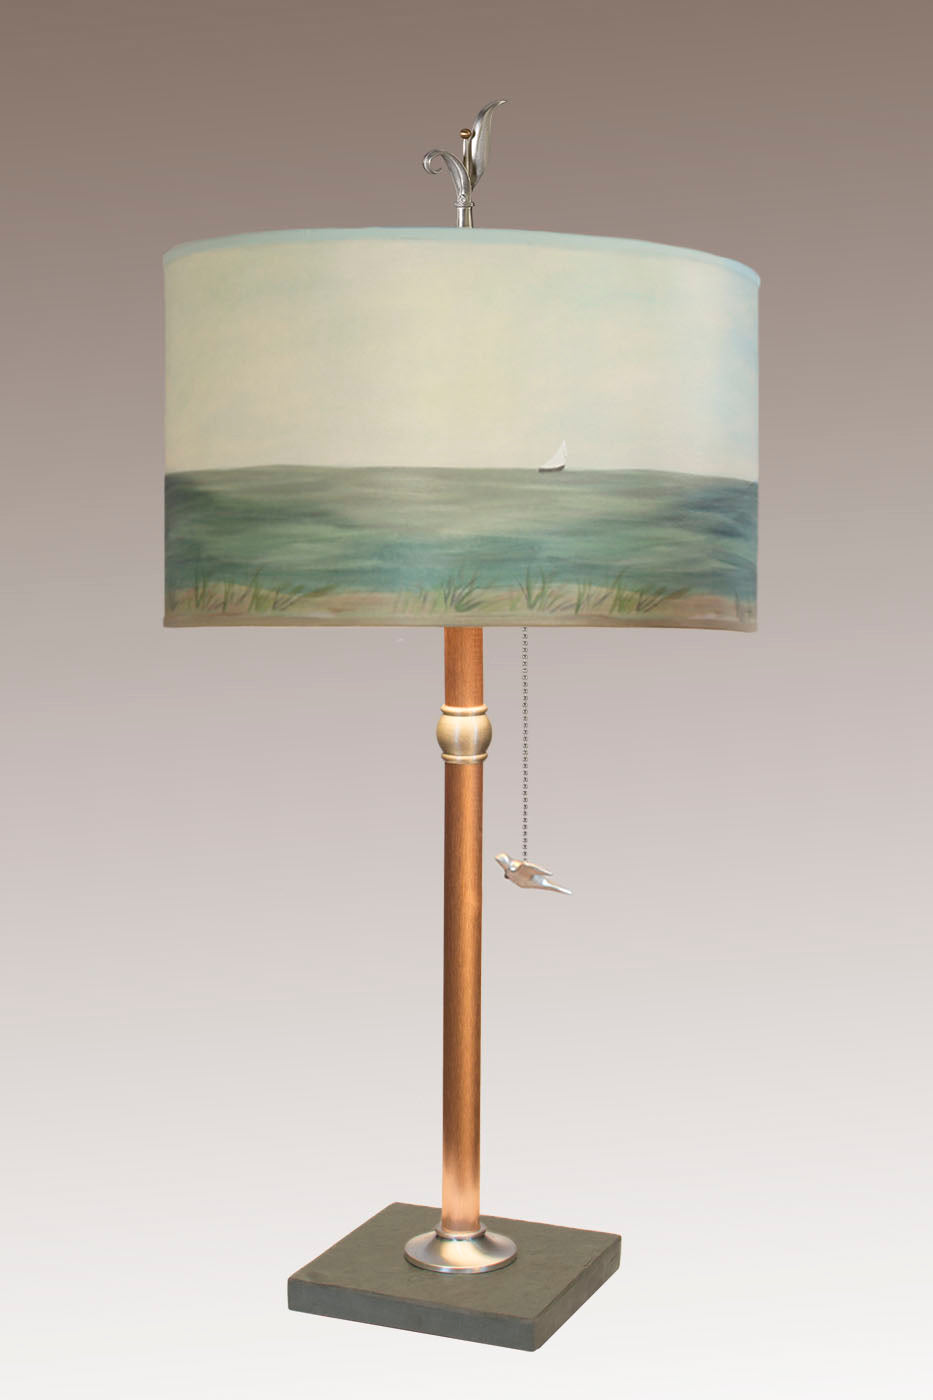 Copper Table Lamp with Large Drum Shade in Shore